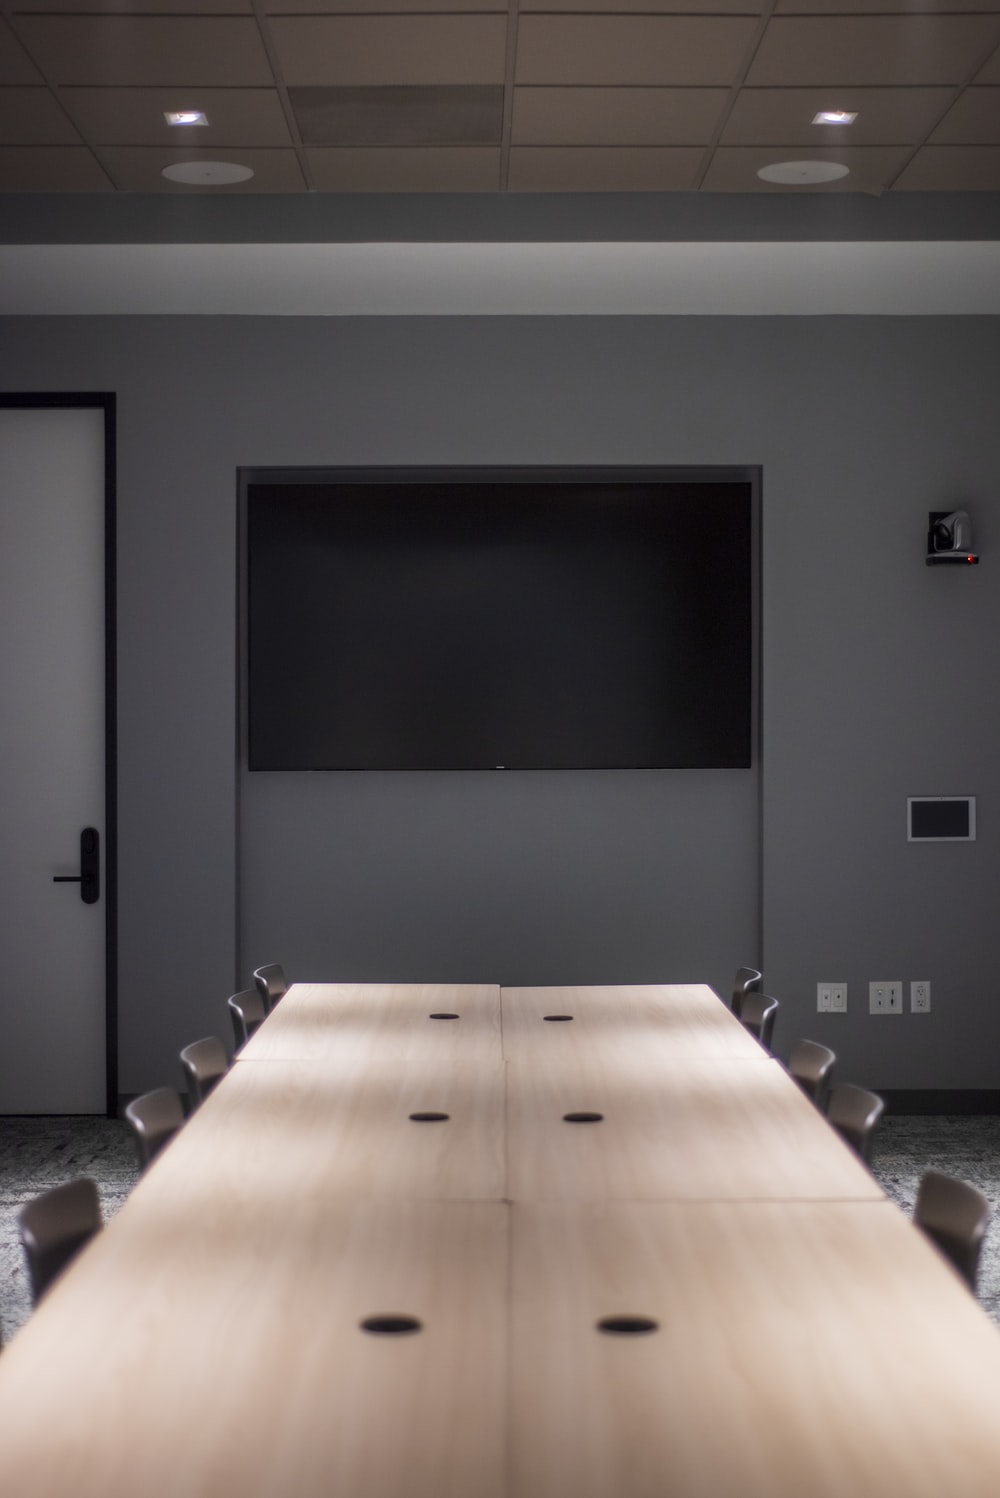 Meeting Room Picture [HD]. Download Free Image